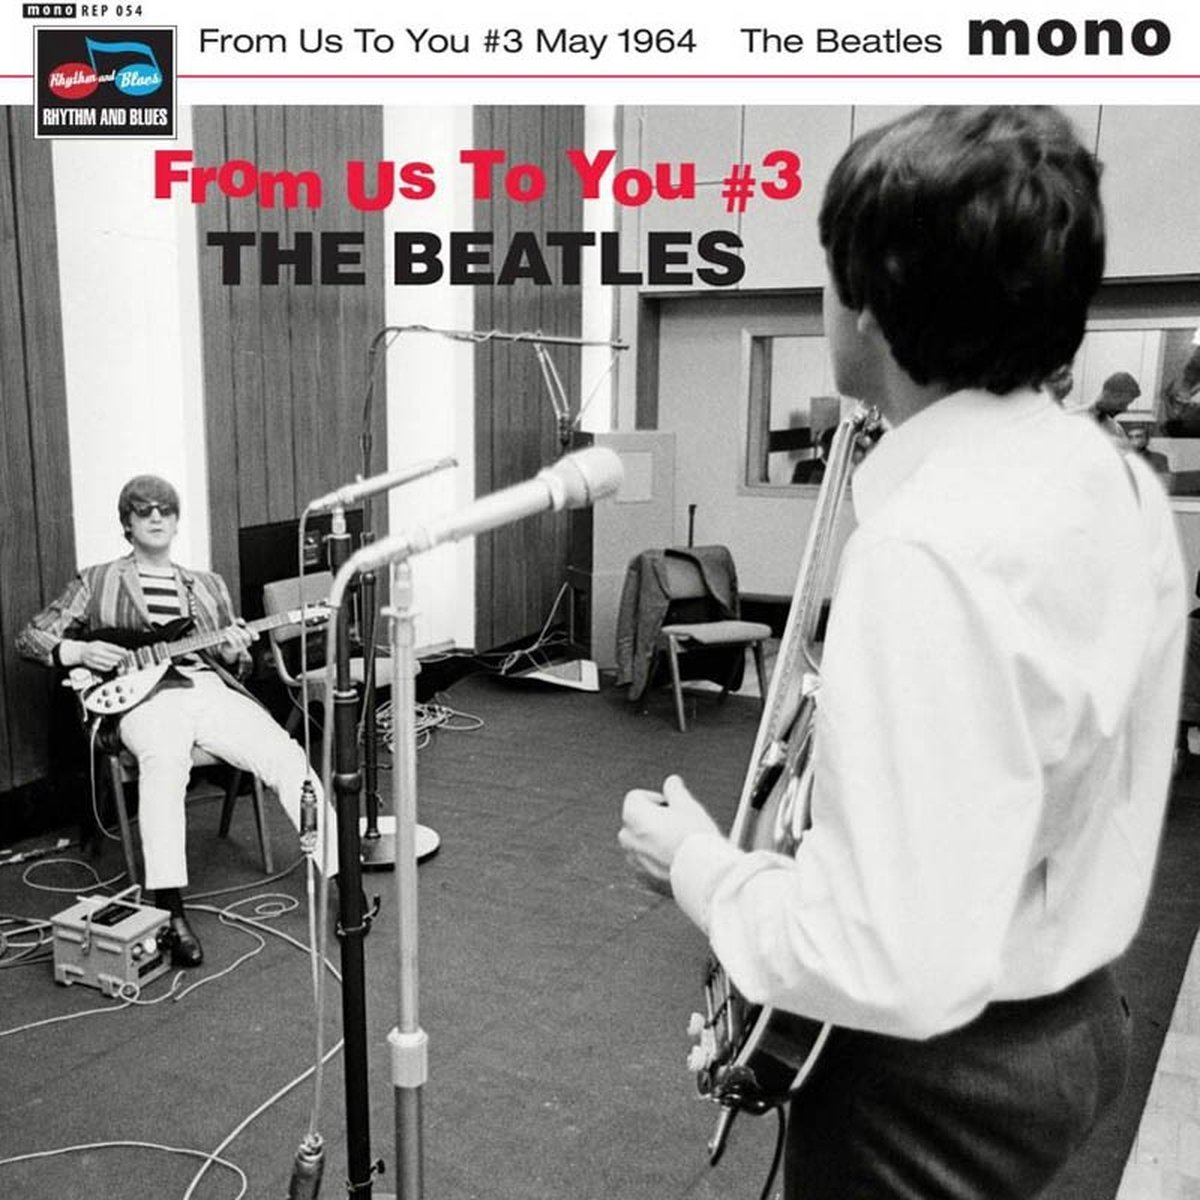 The Beatles - From Us To You #3 1964 (7